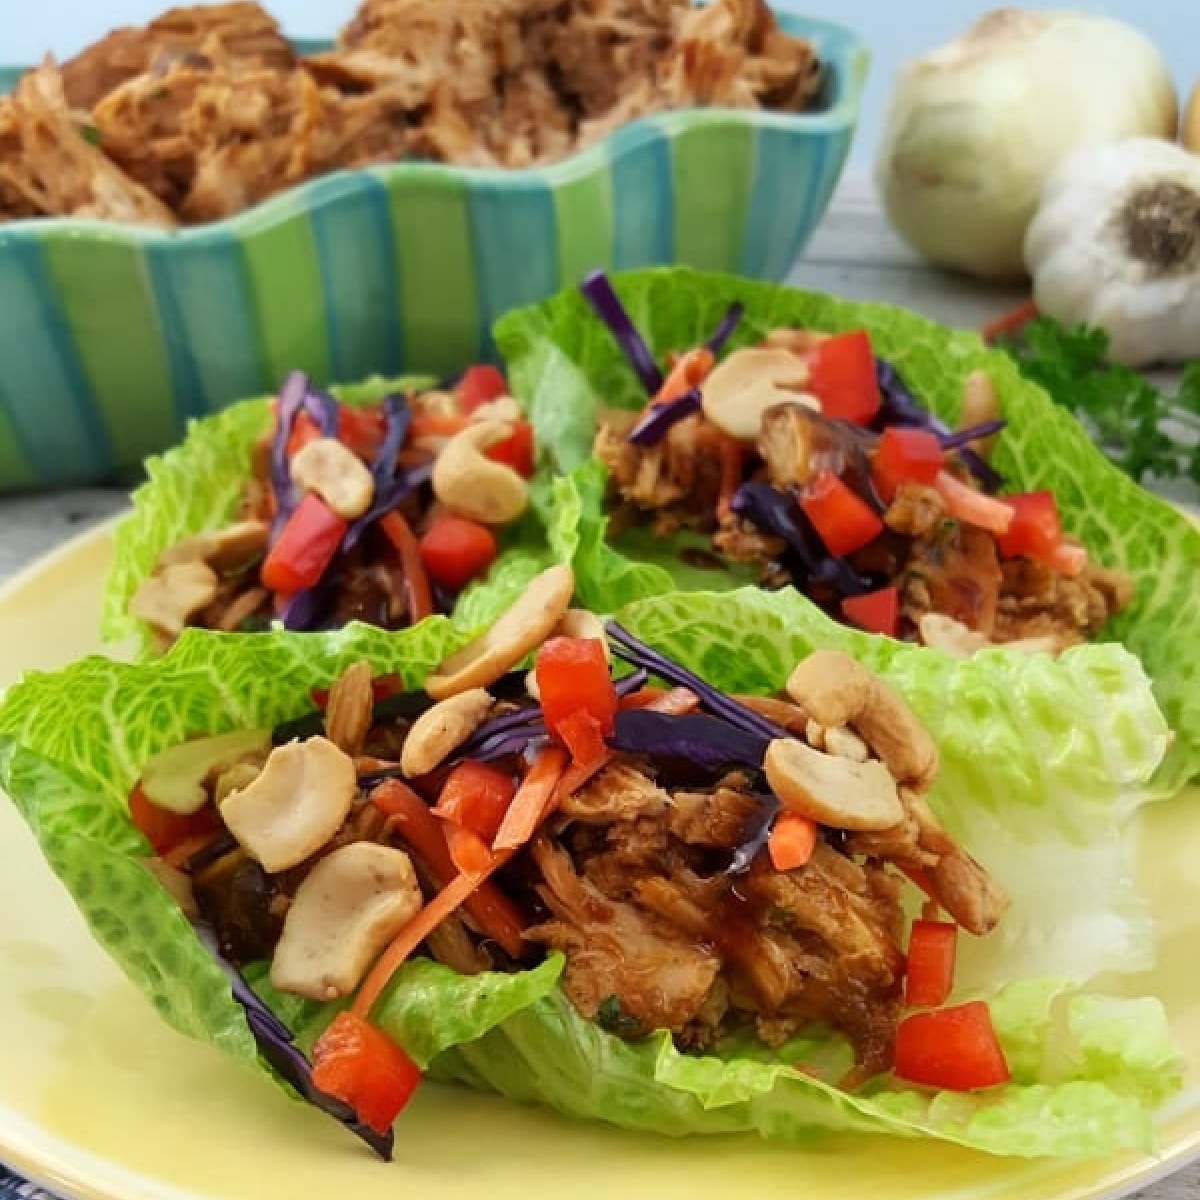 Pulled Pork Lettuce Wraps with peppers, cabbage, and cashews on a plate.